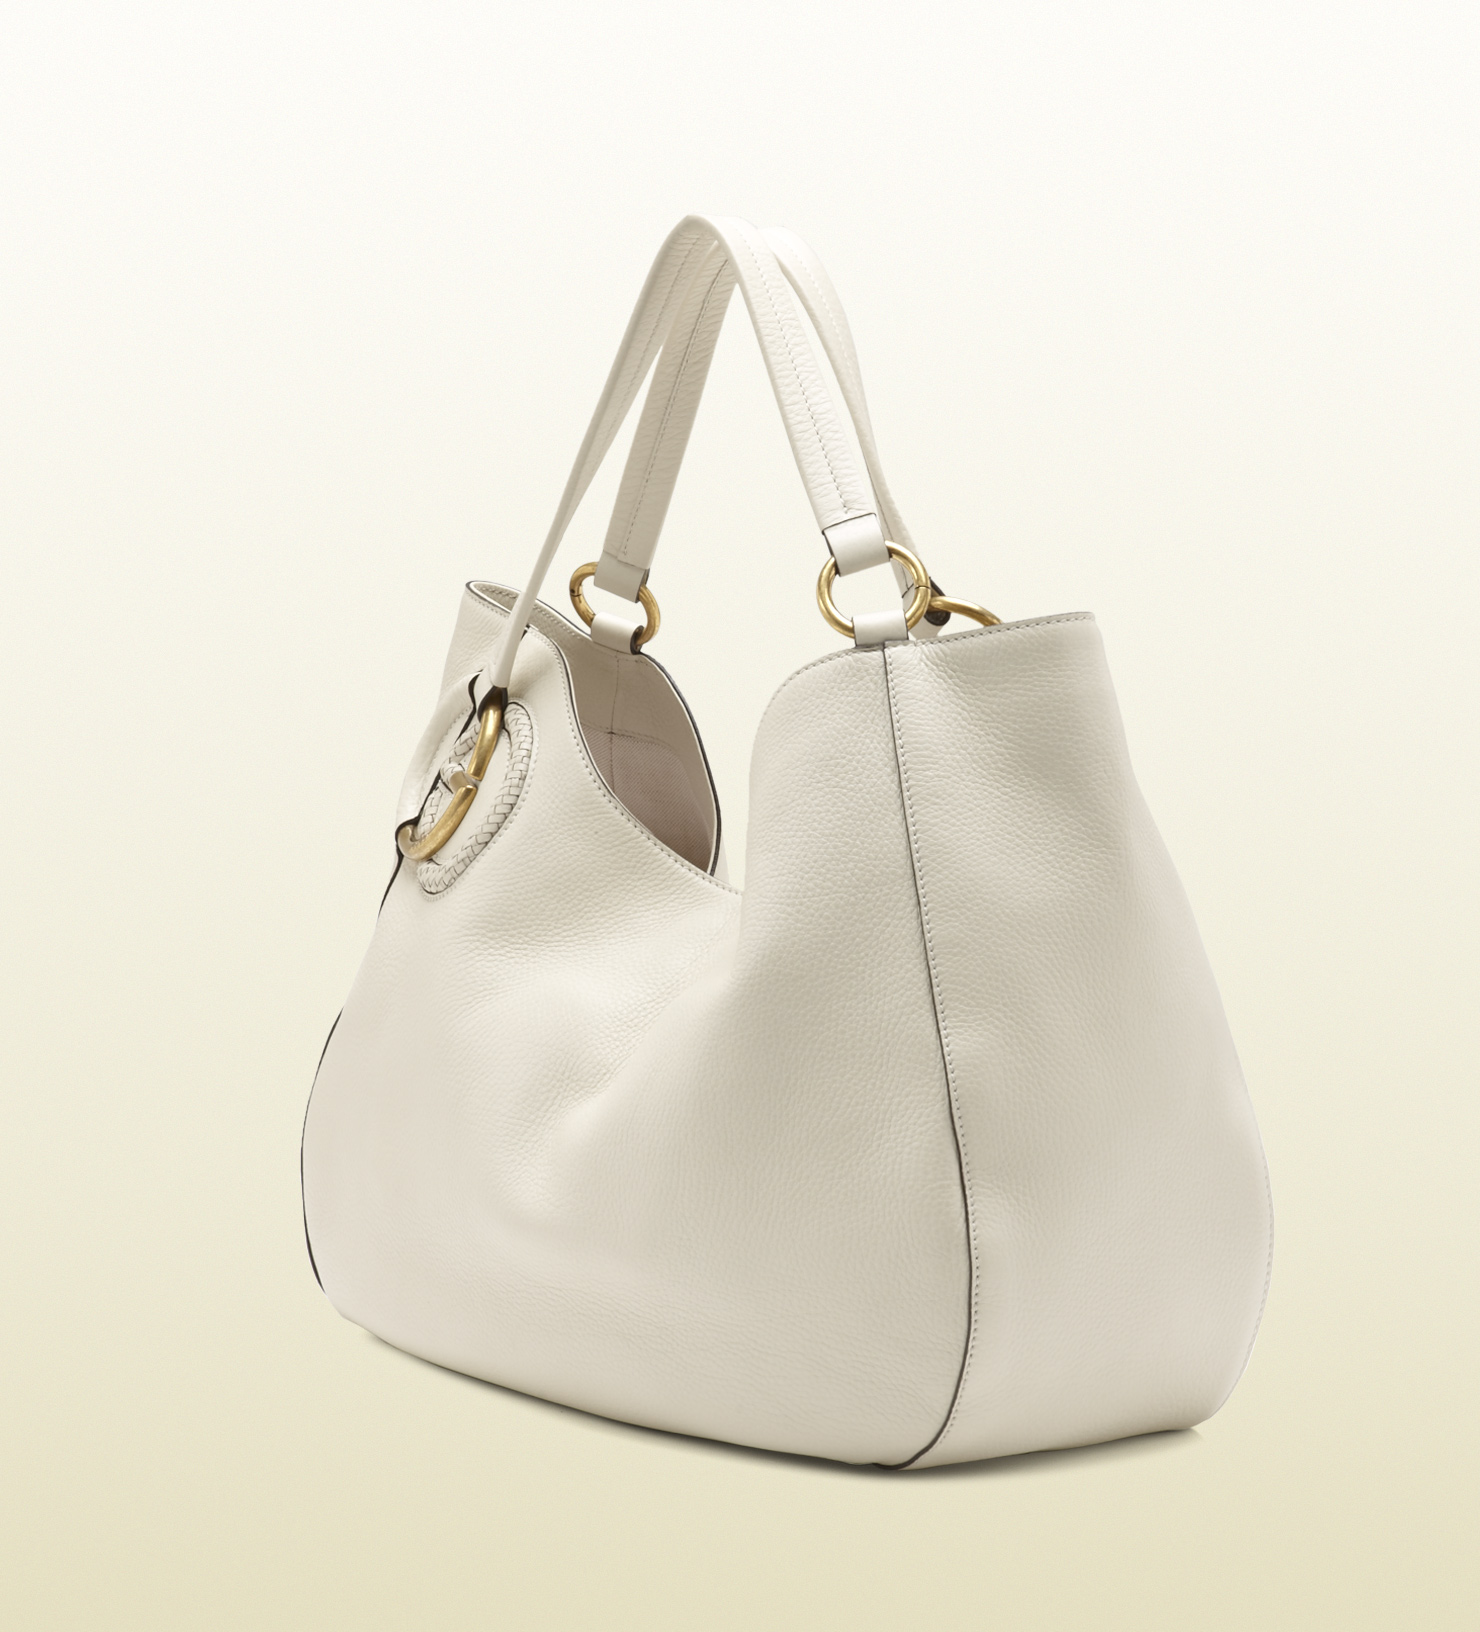 Gucci White Leather Purses :: Keweenaw Bay Indian Community